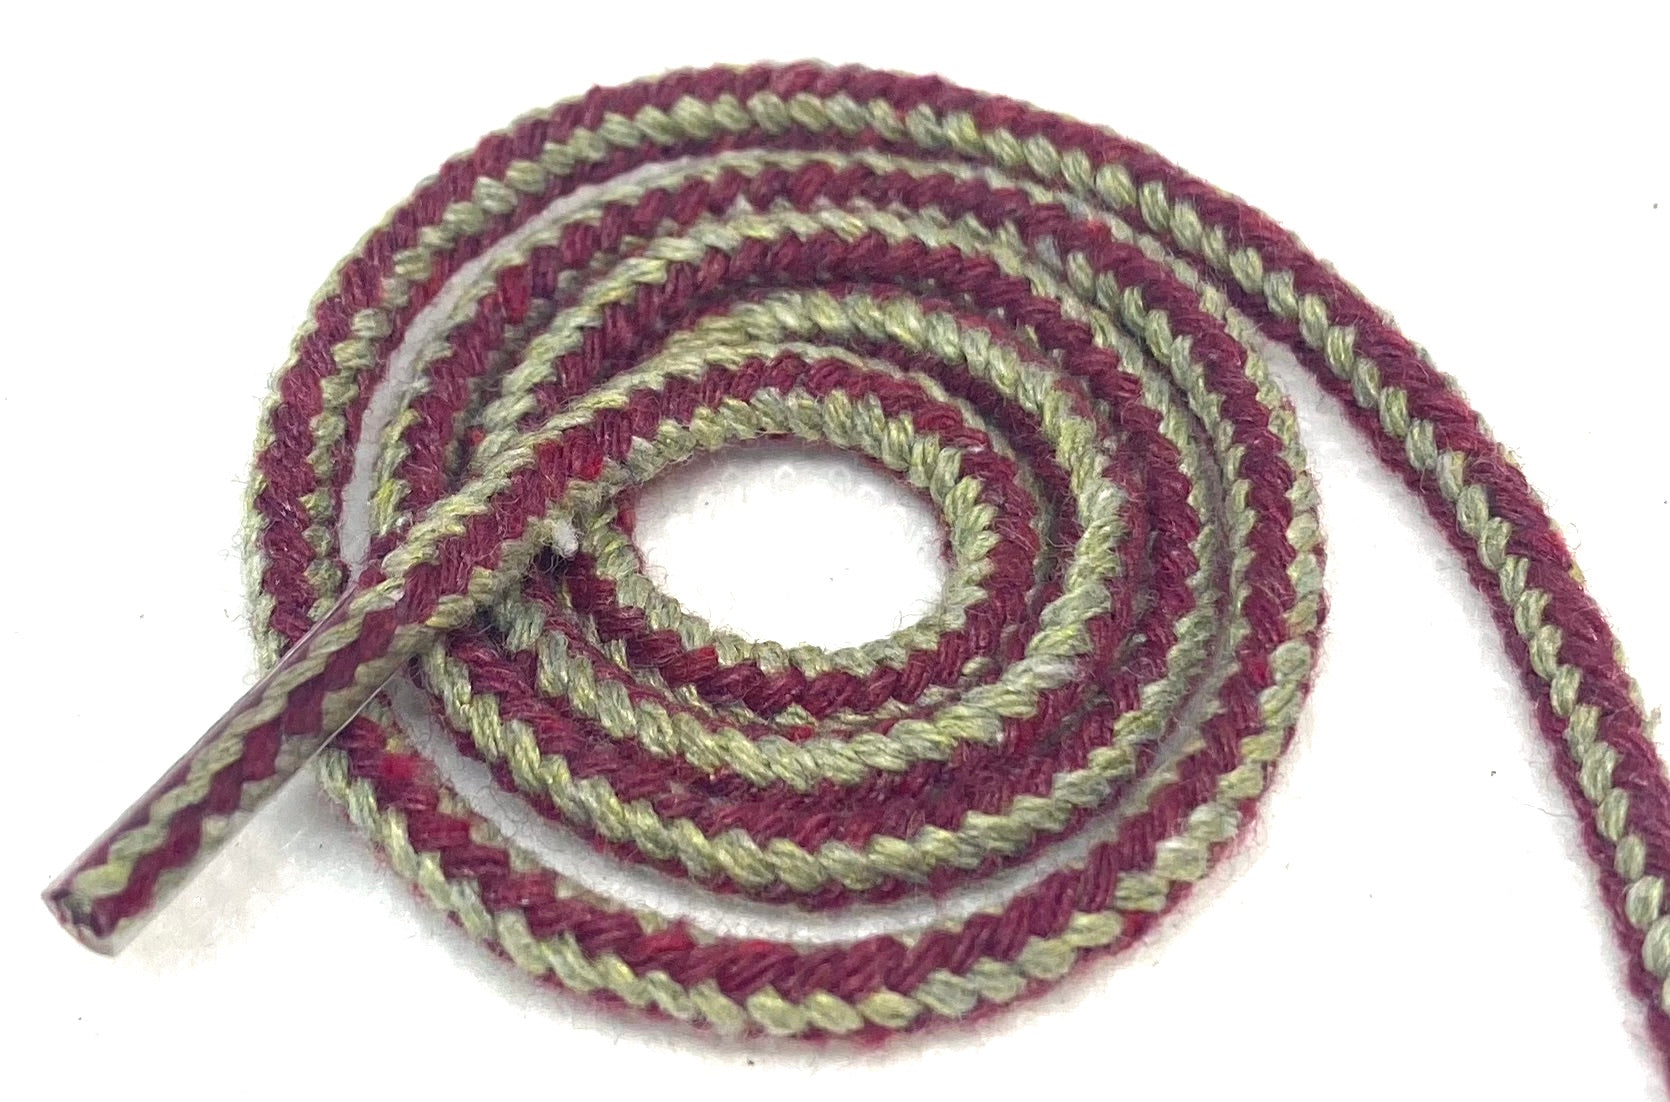 Round Striped Dress Shoelaces - Maroon and Tan